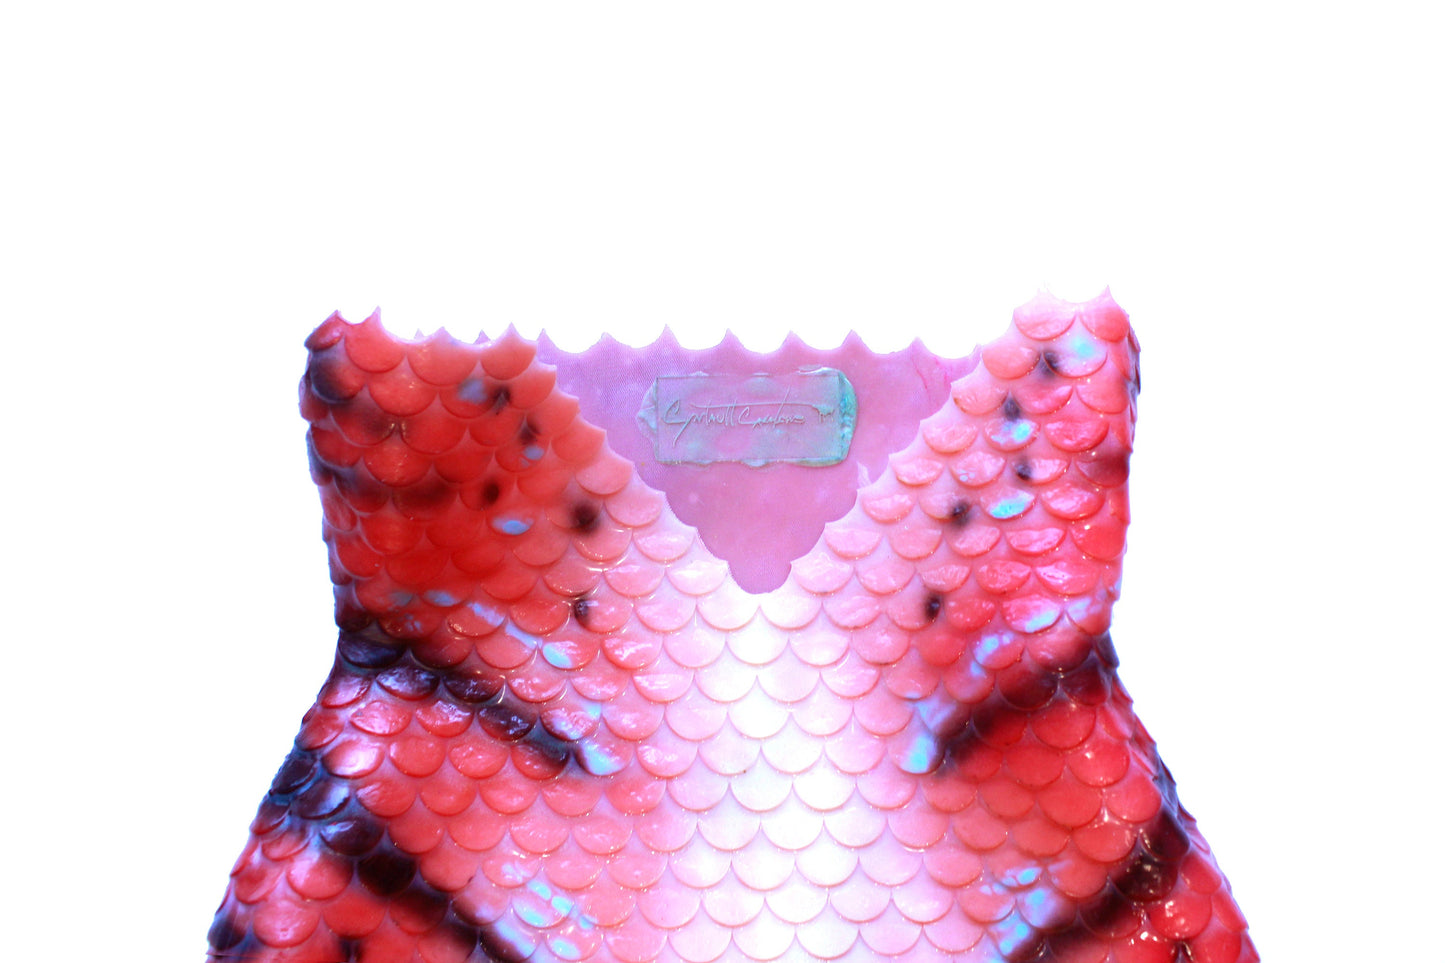 Professional mermaid tail, completely in silicone (dragon skin), with monofin inside.